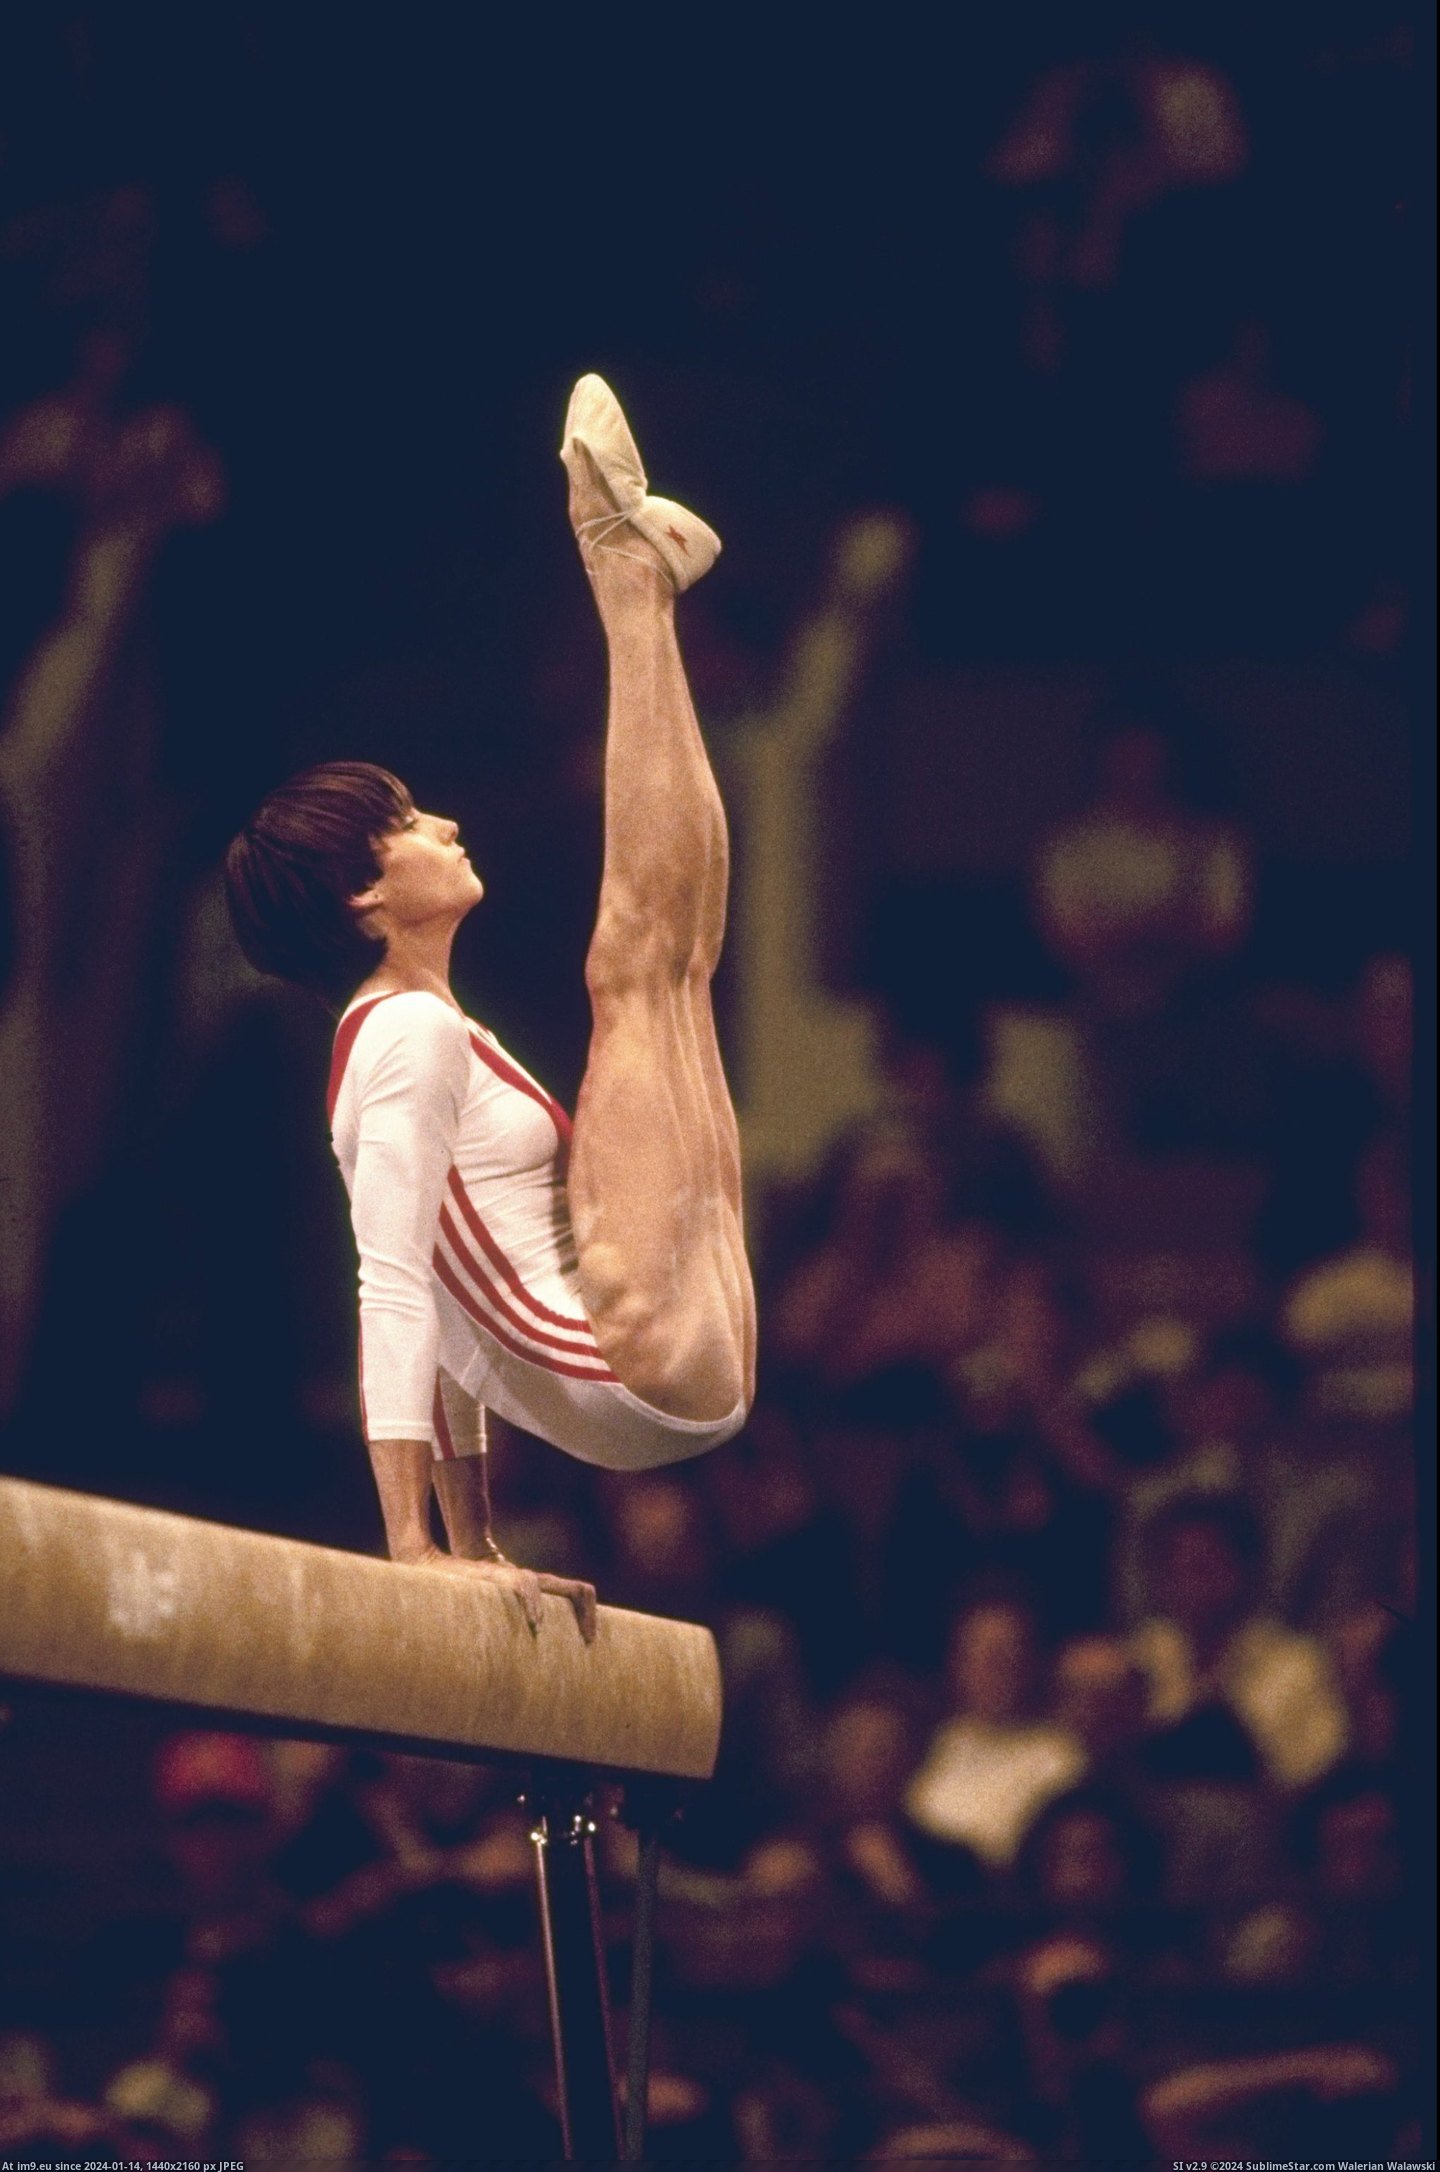 #Perfect #Leg #History #Nadia #Comaneci #Age #Muscles #Olympic [Pics] Leg muscles of the first perfect 10 in Olympic history, at age 14. Nadia Comaneci. Pic. (Изображение из альбом My r/PICS favs))